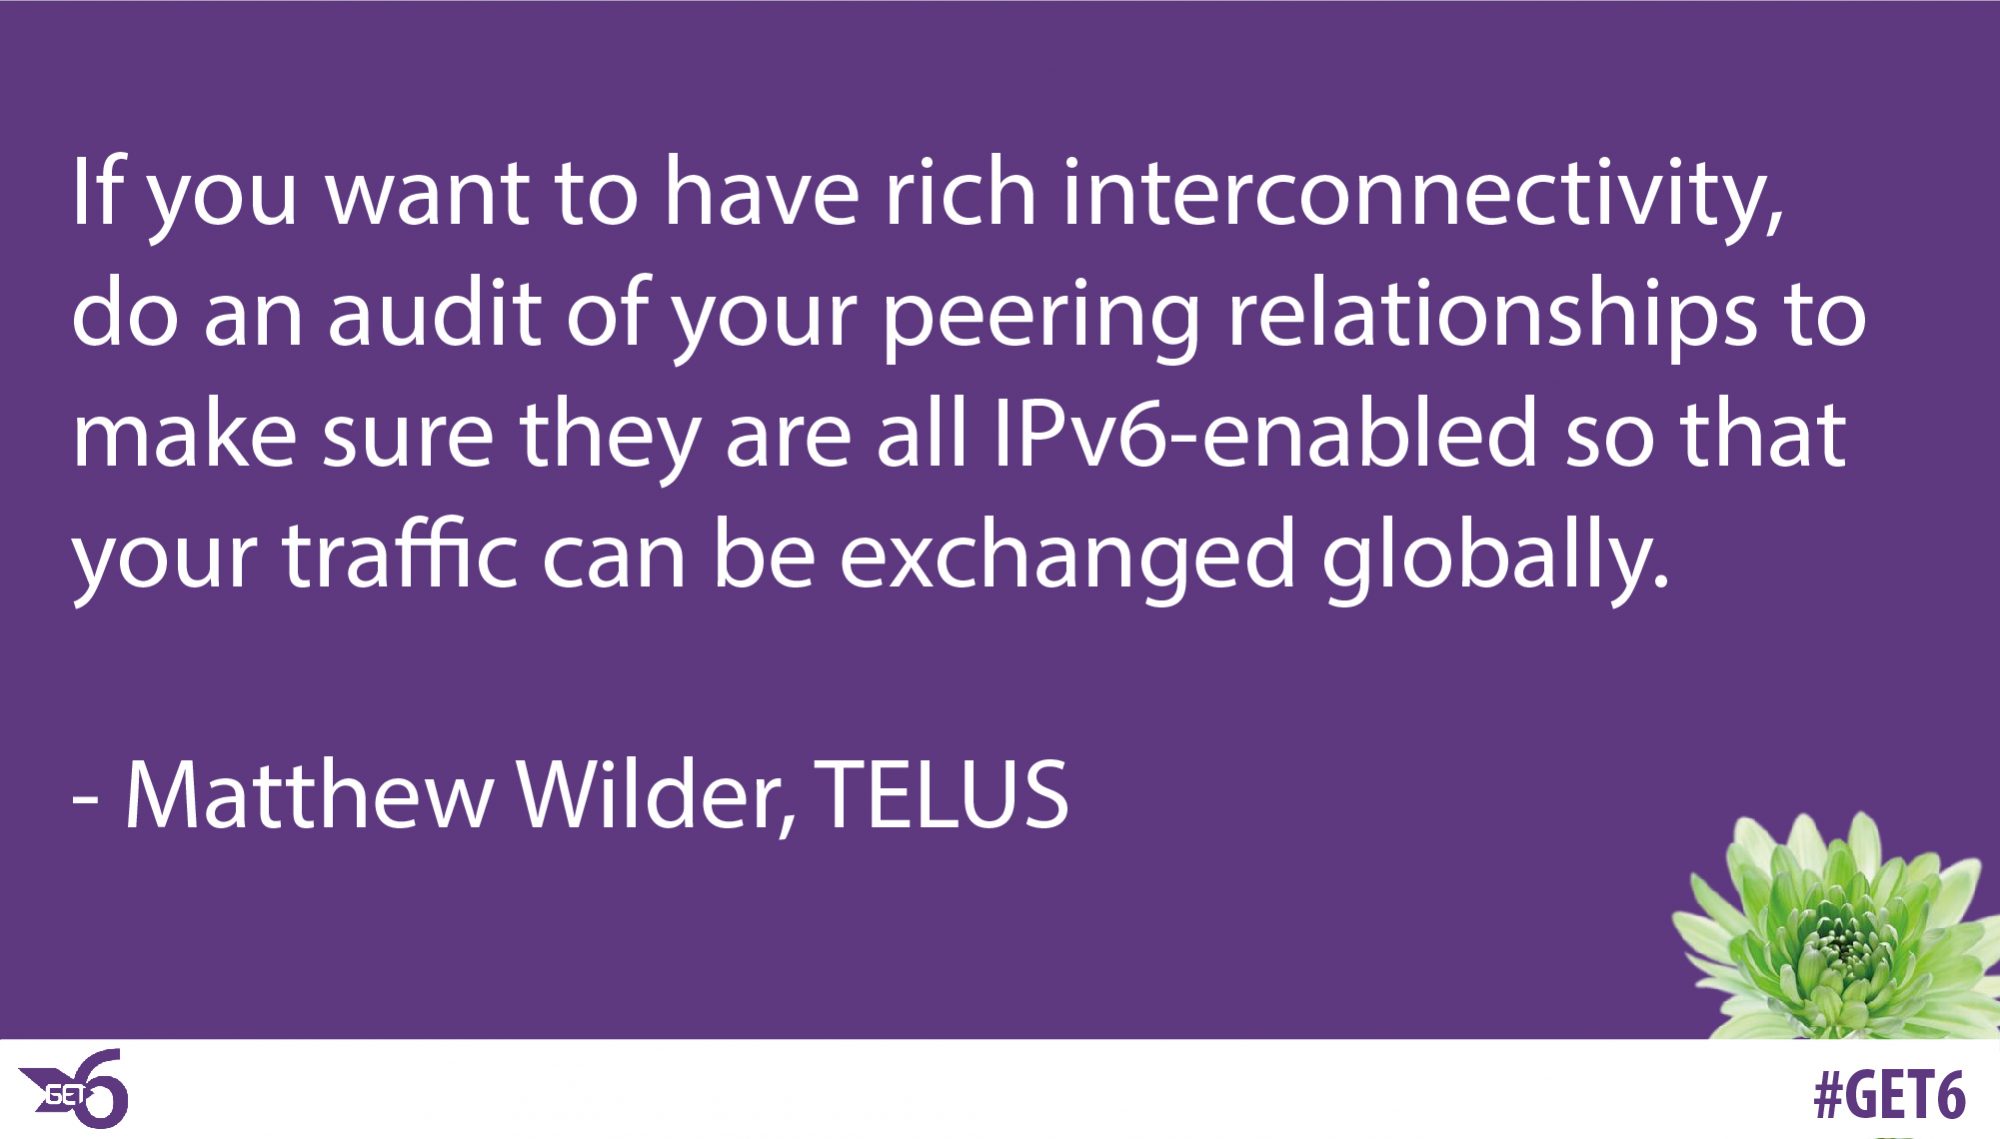 " If you want to have rich interconnectivity, do an audit of your peering relationships to make sure they are all IPv6-enabled so that your traffic can be exchanged globally."